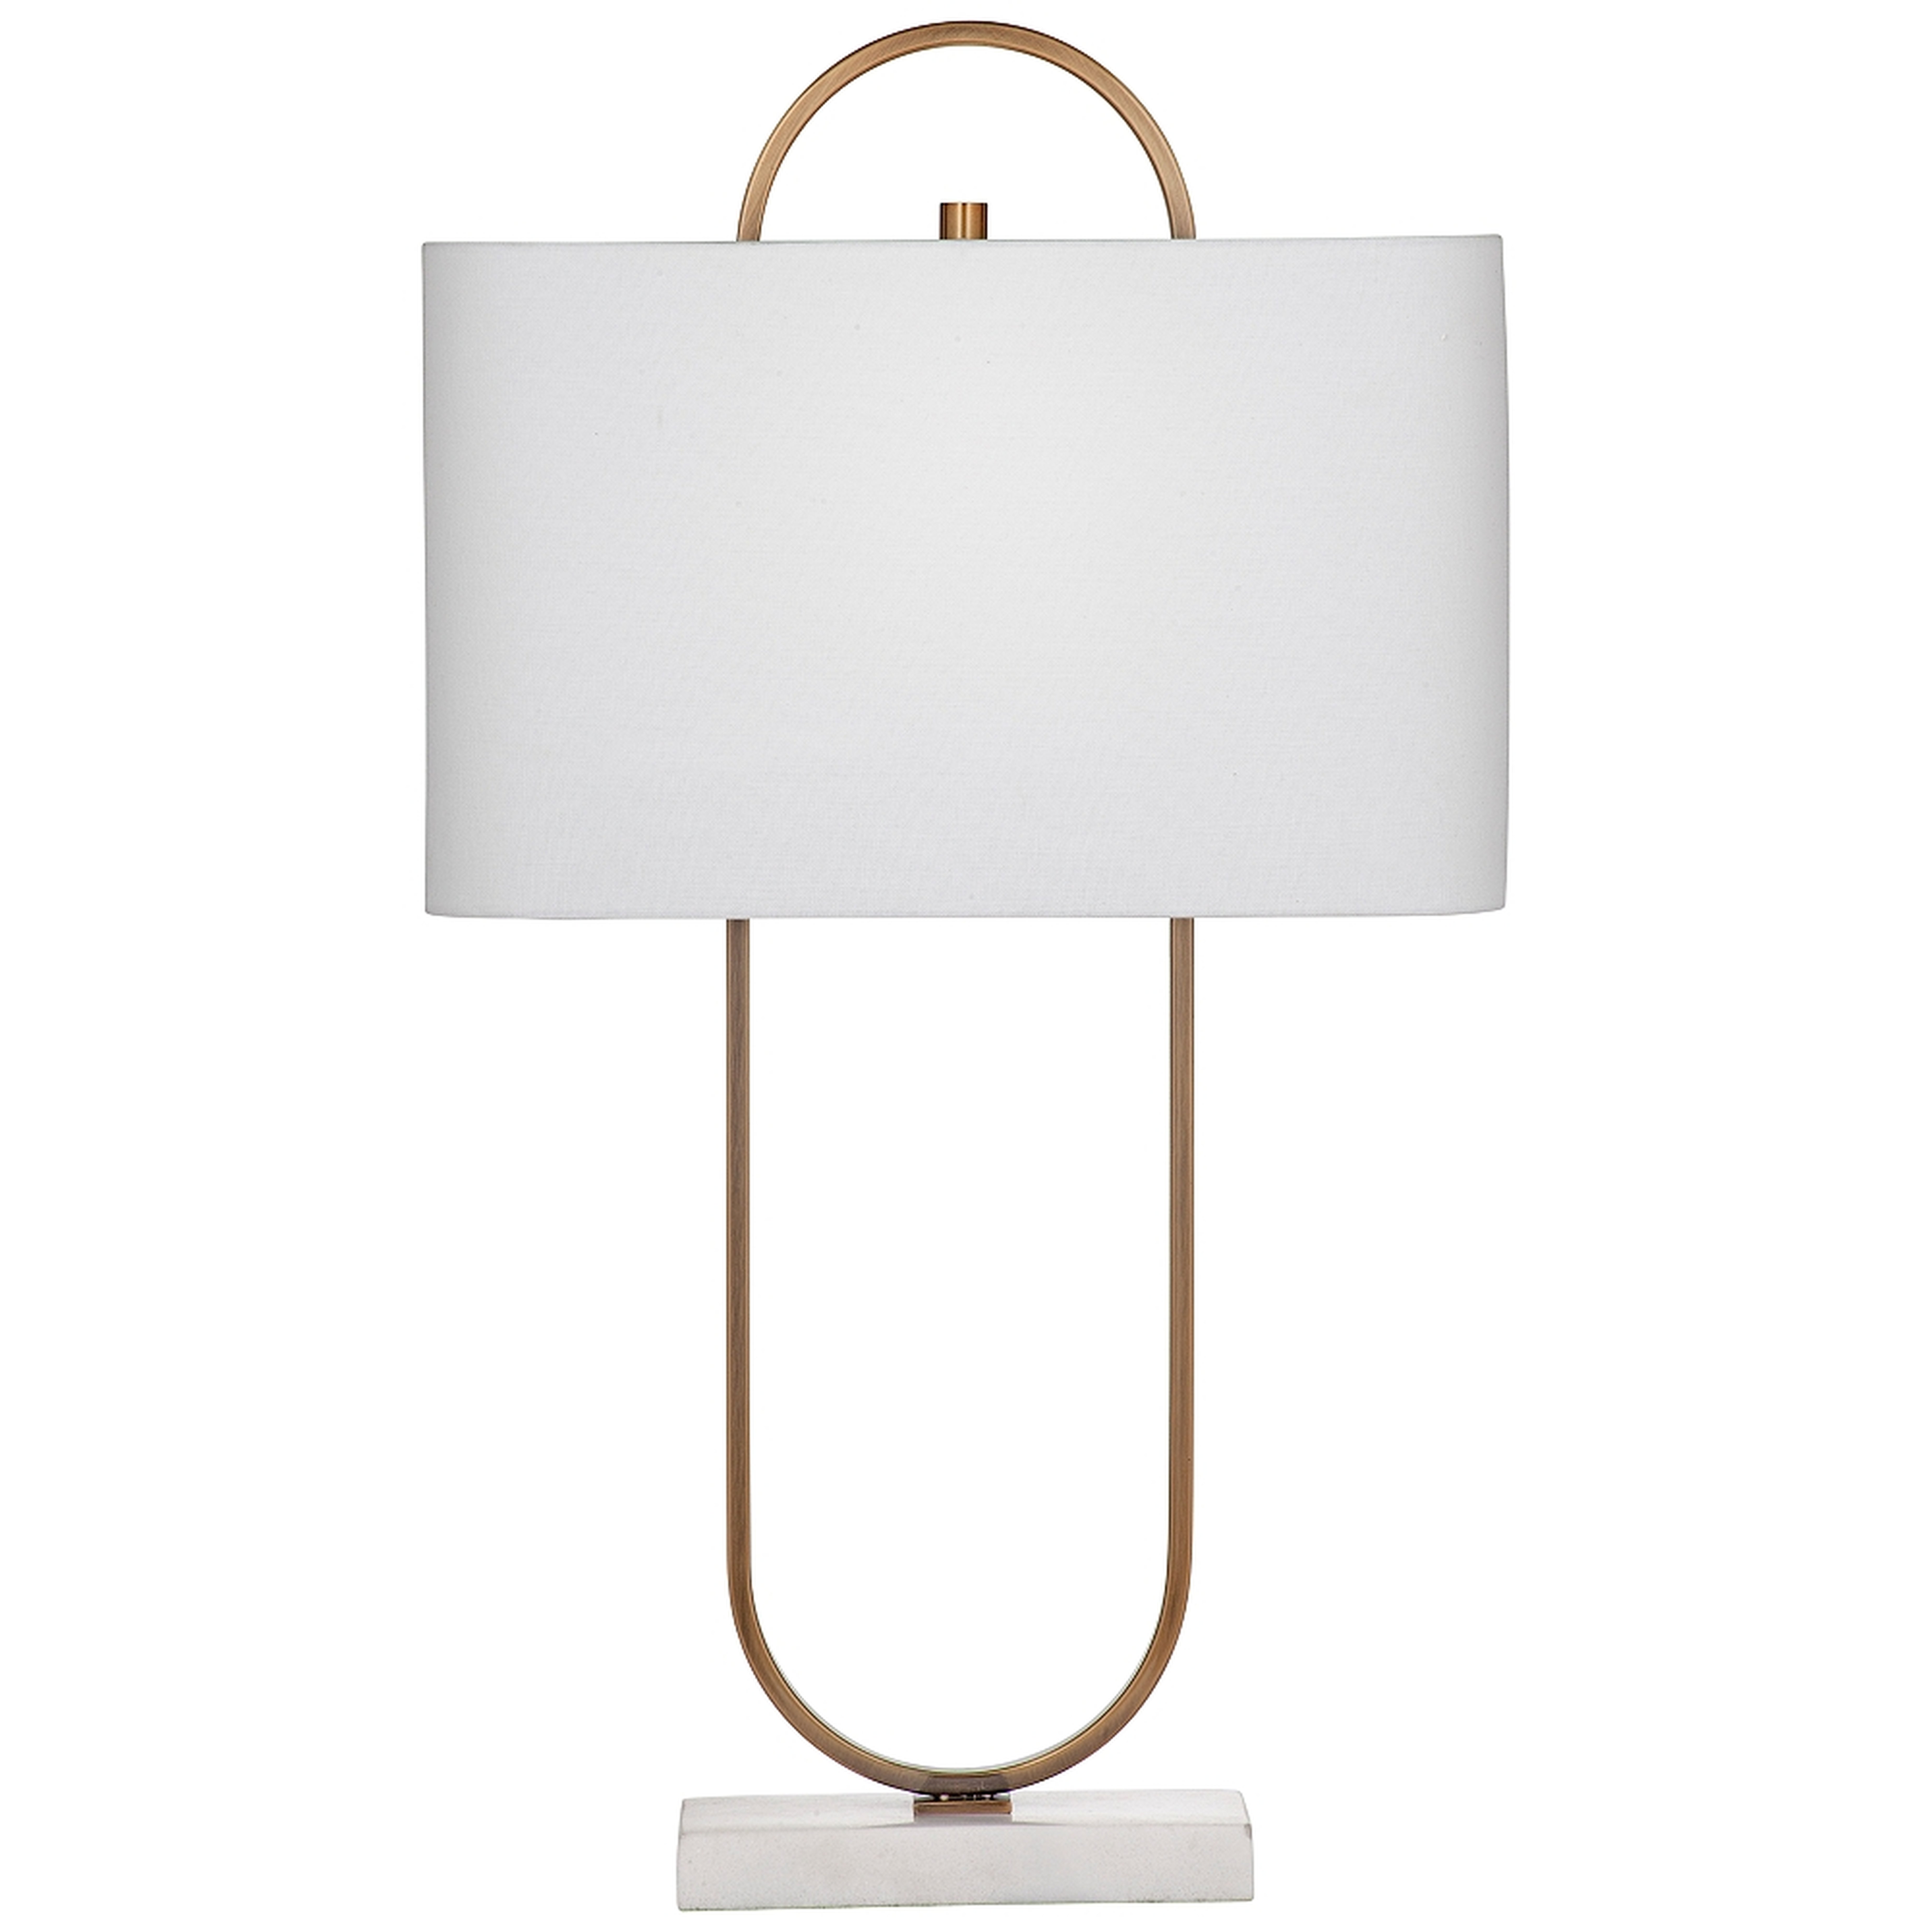 Mabel Brass Metal Table Lamp - Style # 304E0 - Lamps Plus